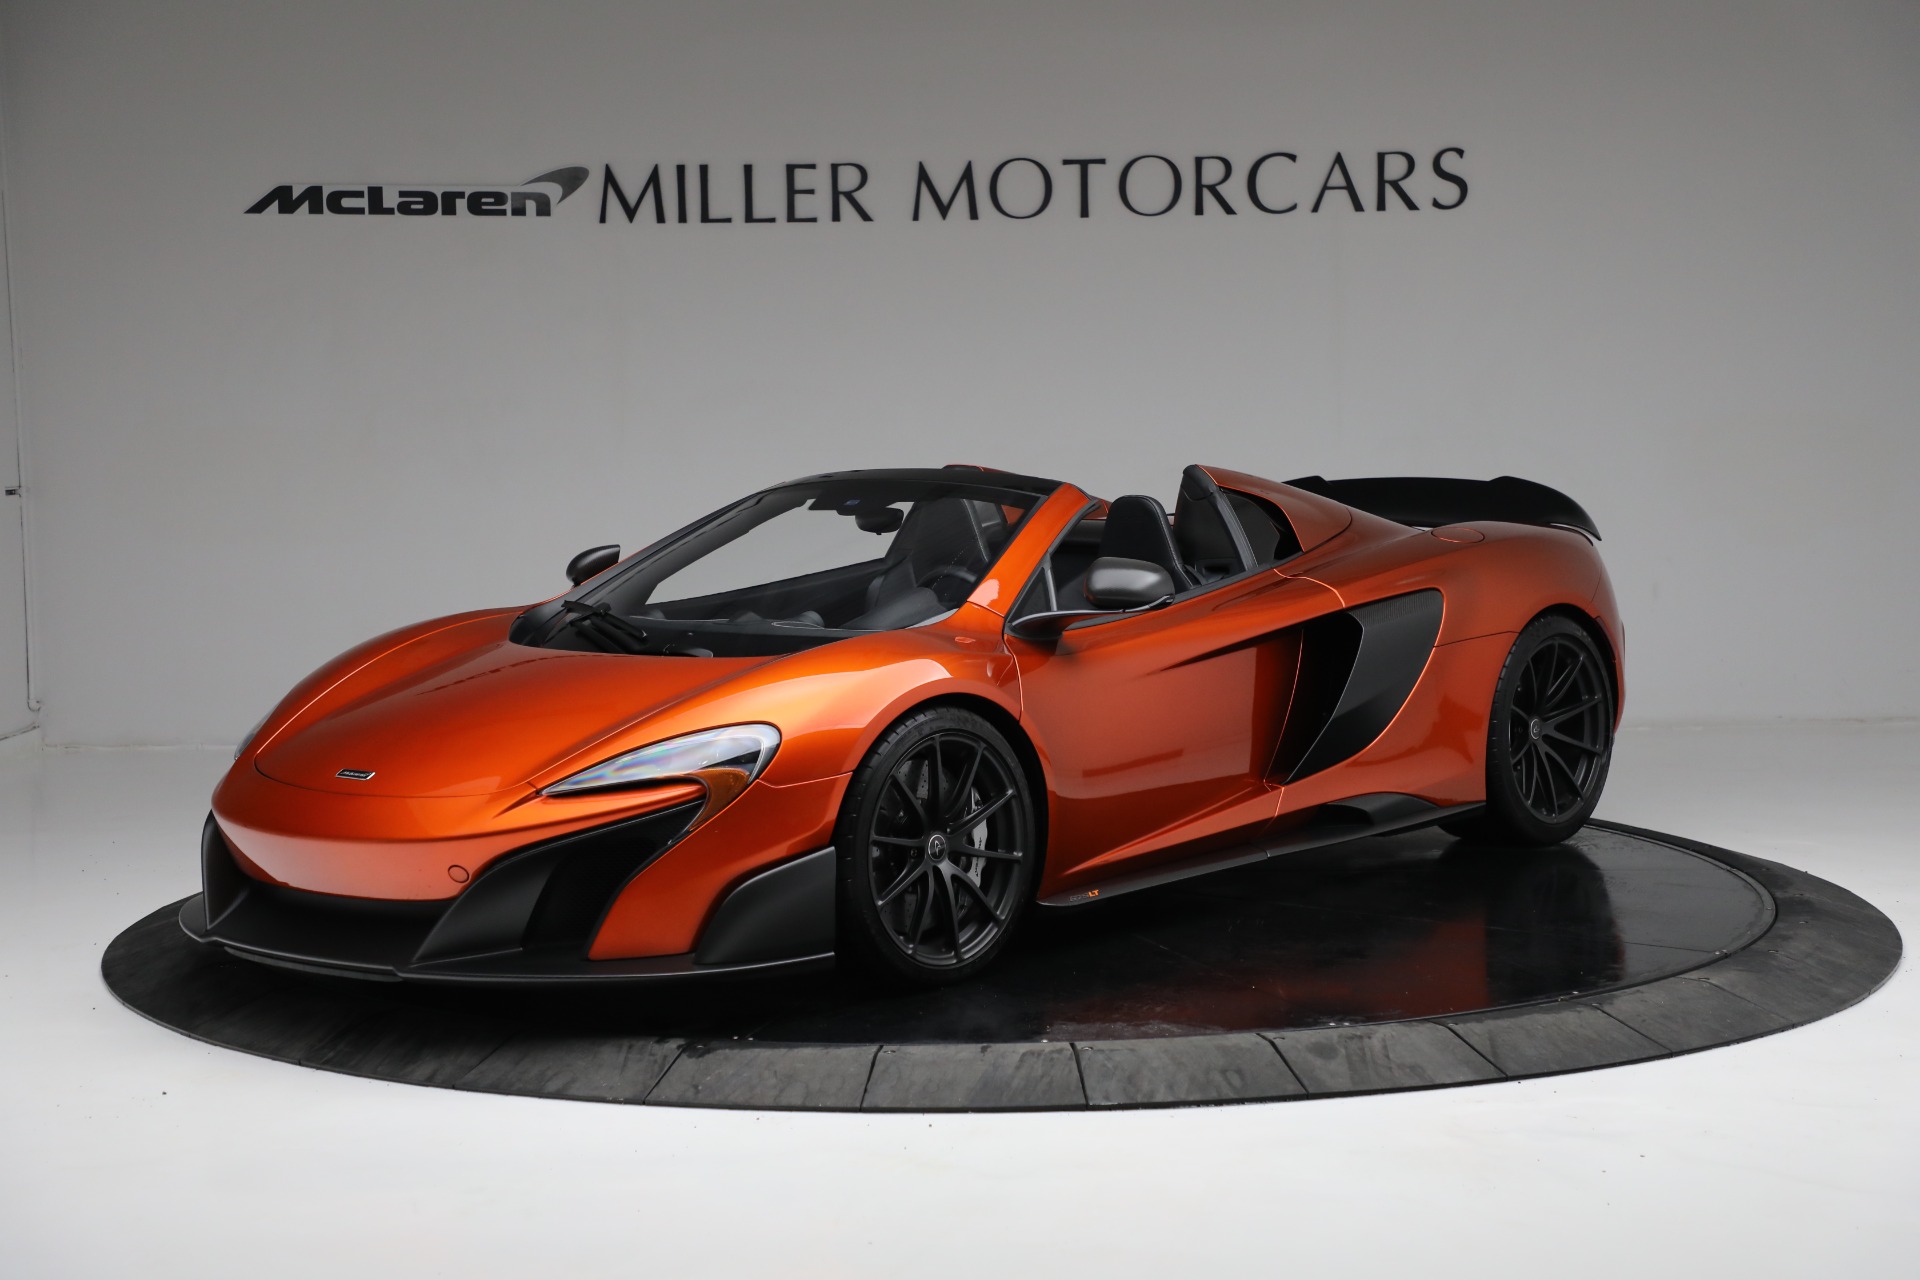 Used 2016 McLaren 675LT Spider for sale $284,900 at Rolls-Royce Motor Cars Greenwich in Greenwich CT 06830 1